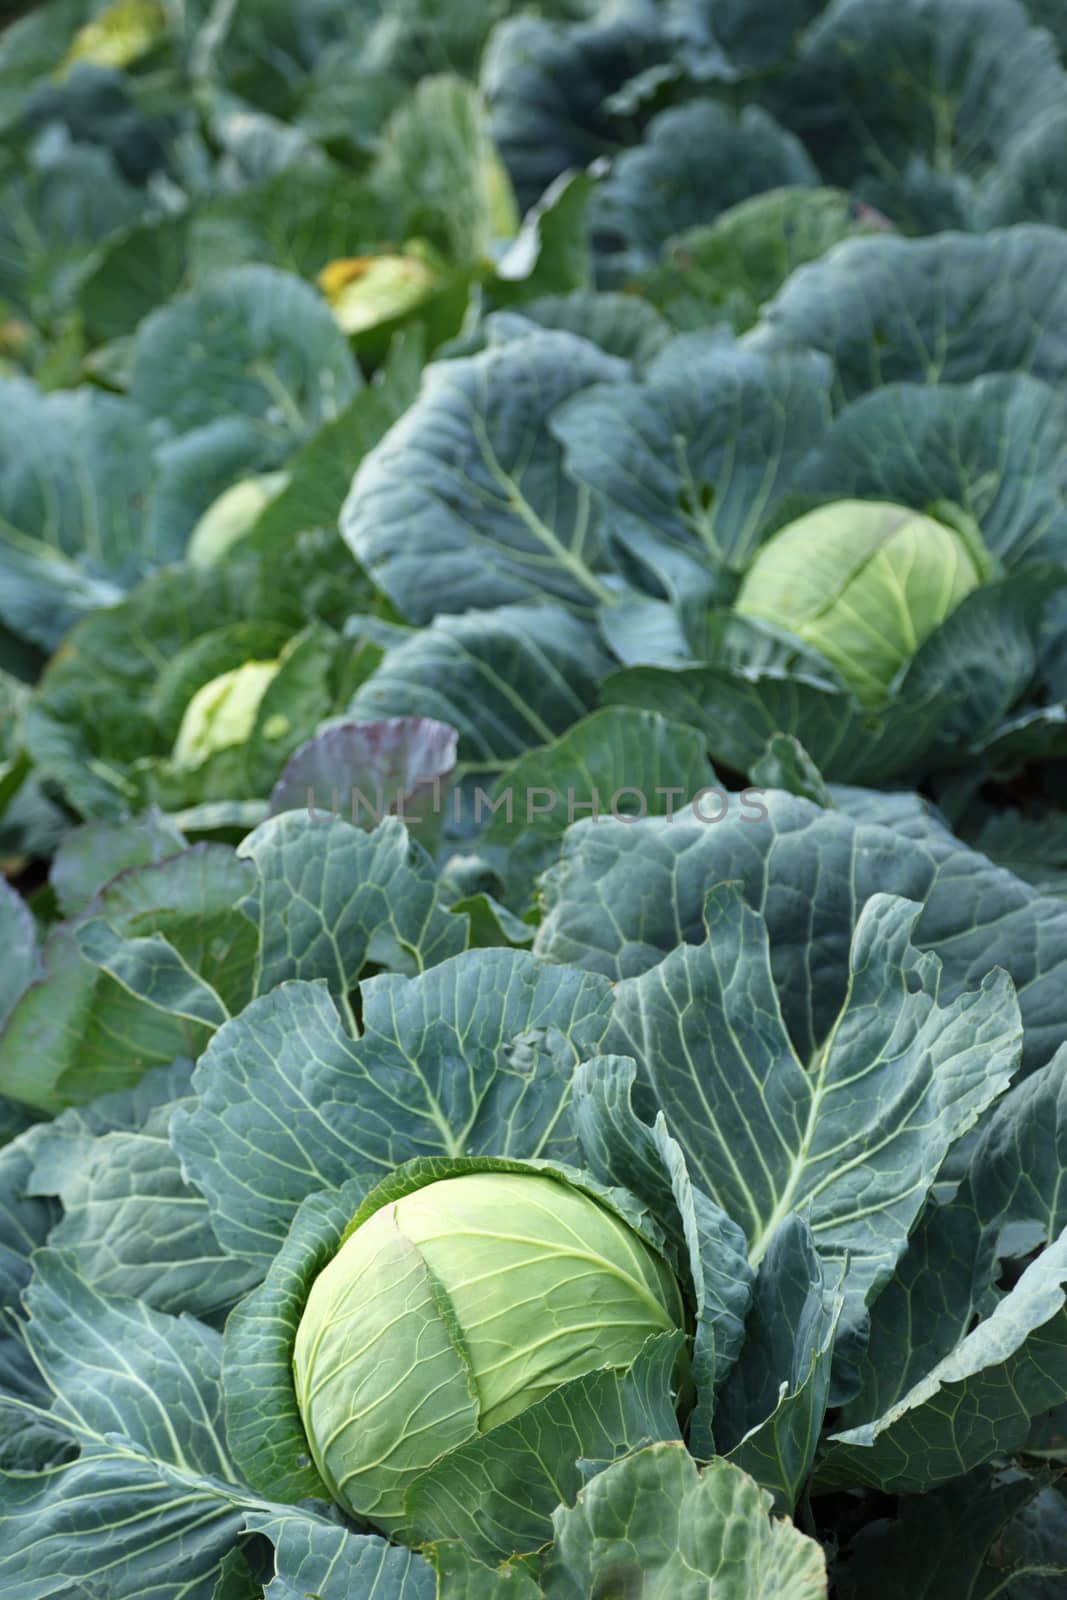 Young green heads of cabbage